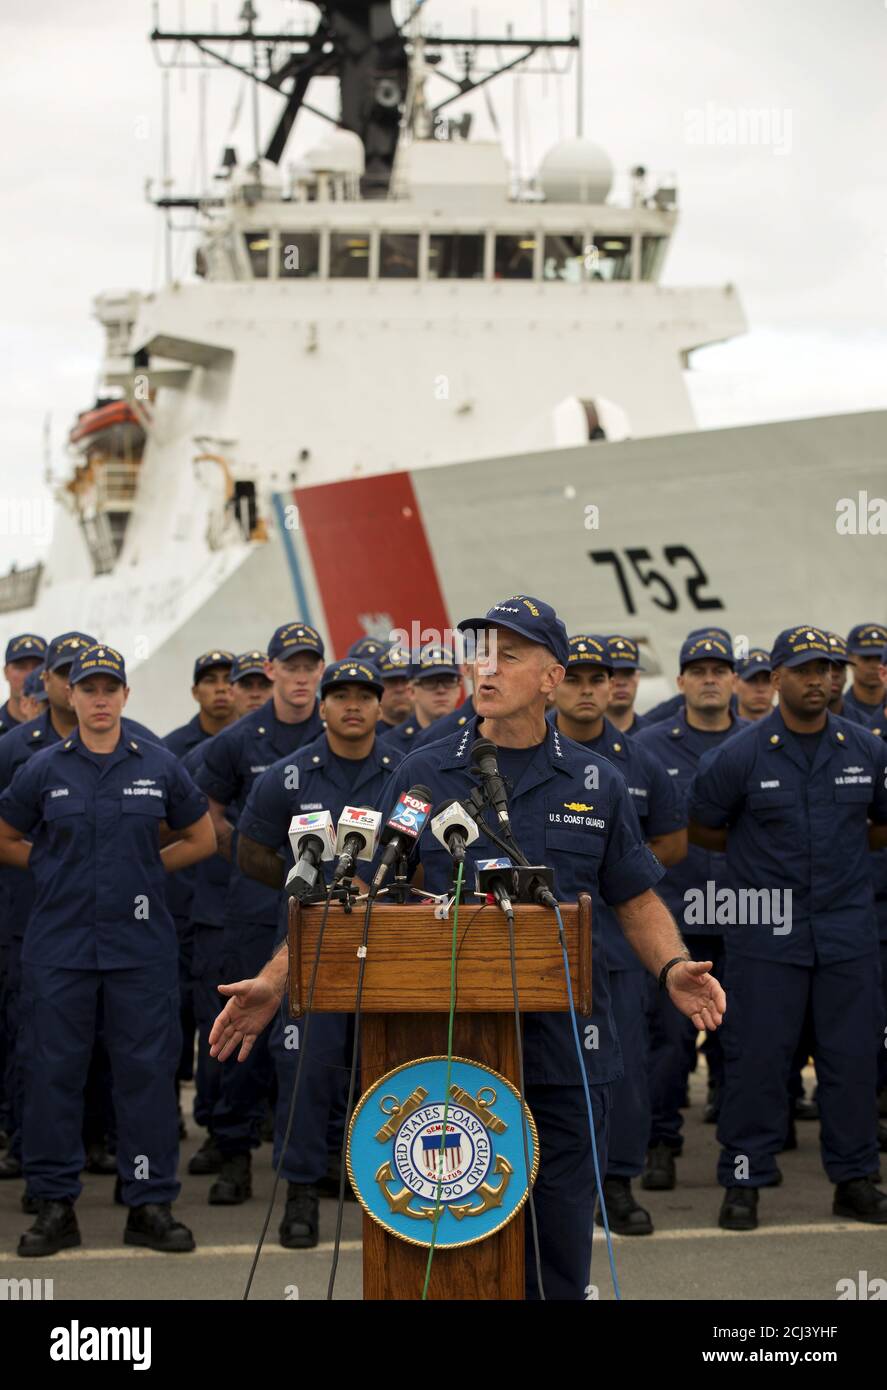 U.S. Coast Guard Commandant  Admiral Paul Zukunft speaks in front of the crew of the Coast Guard Cutter Stratton while announcing 66,000 pounds of cocaine worth $1.01 billion wholesale was seized in the Eastern Pacific Ocean upon the ship's arrival in San Diego, California August 10, 2015. Zukunft, announced the Coast Guard and partner agencies had seized more cocaine in the Eastern Pacific Ocean in the last 10 months than in fiscal years 2012 through 2014 combined.  REUTERS/Mike Blake Stock Photo